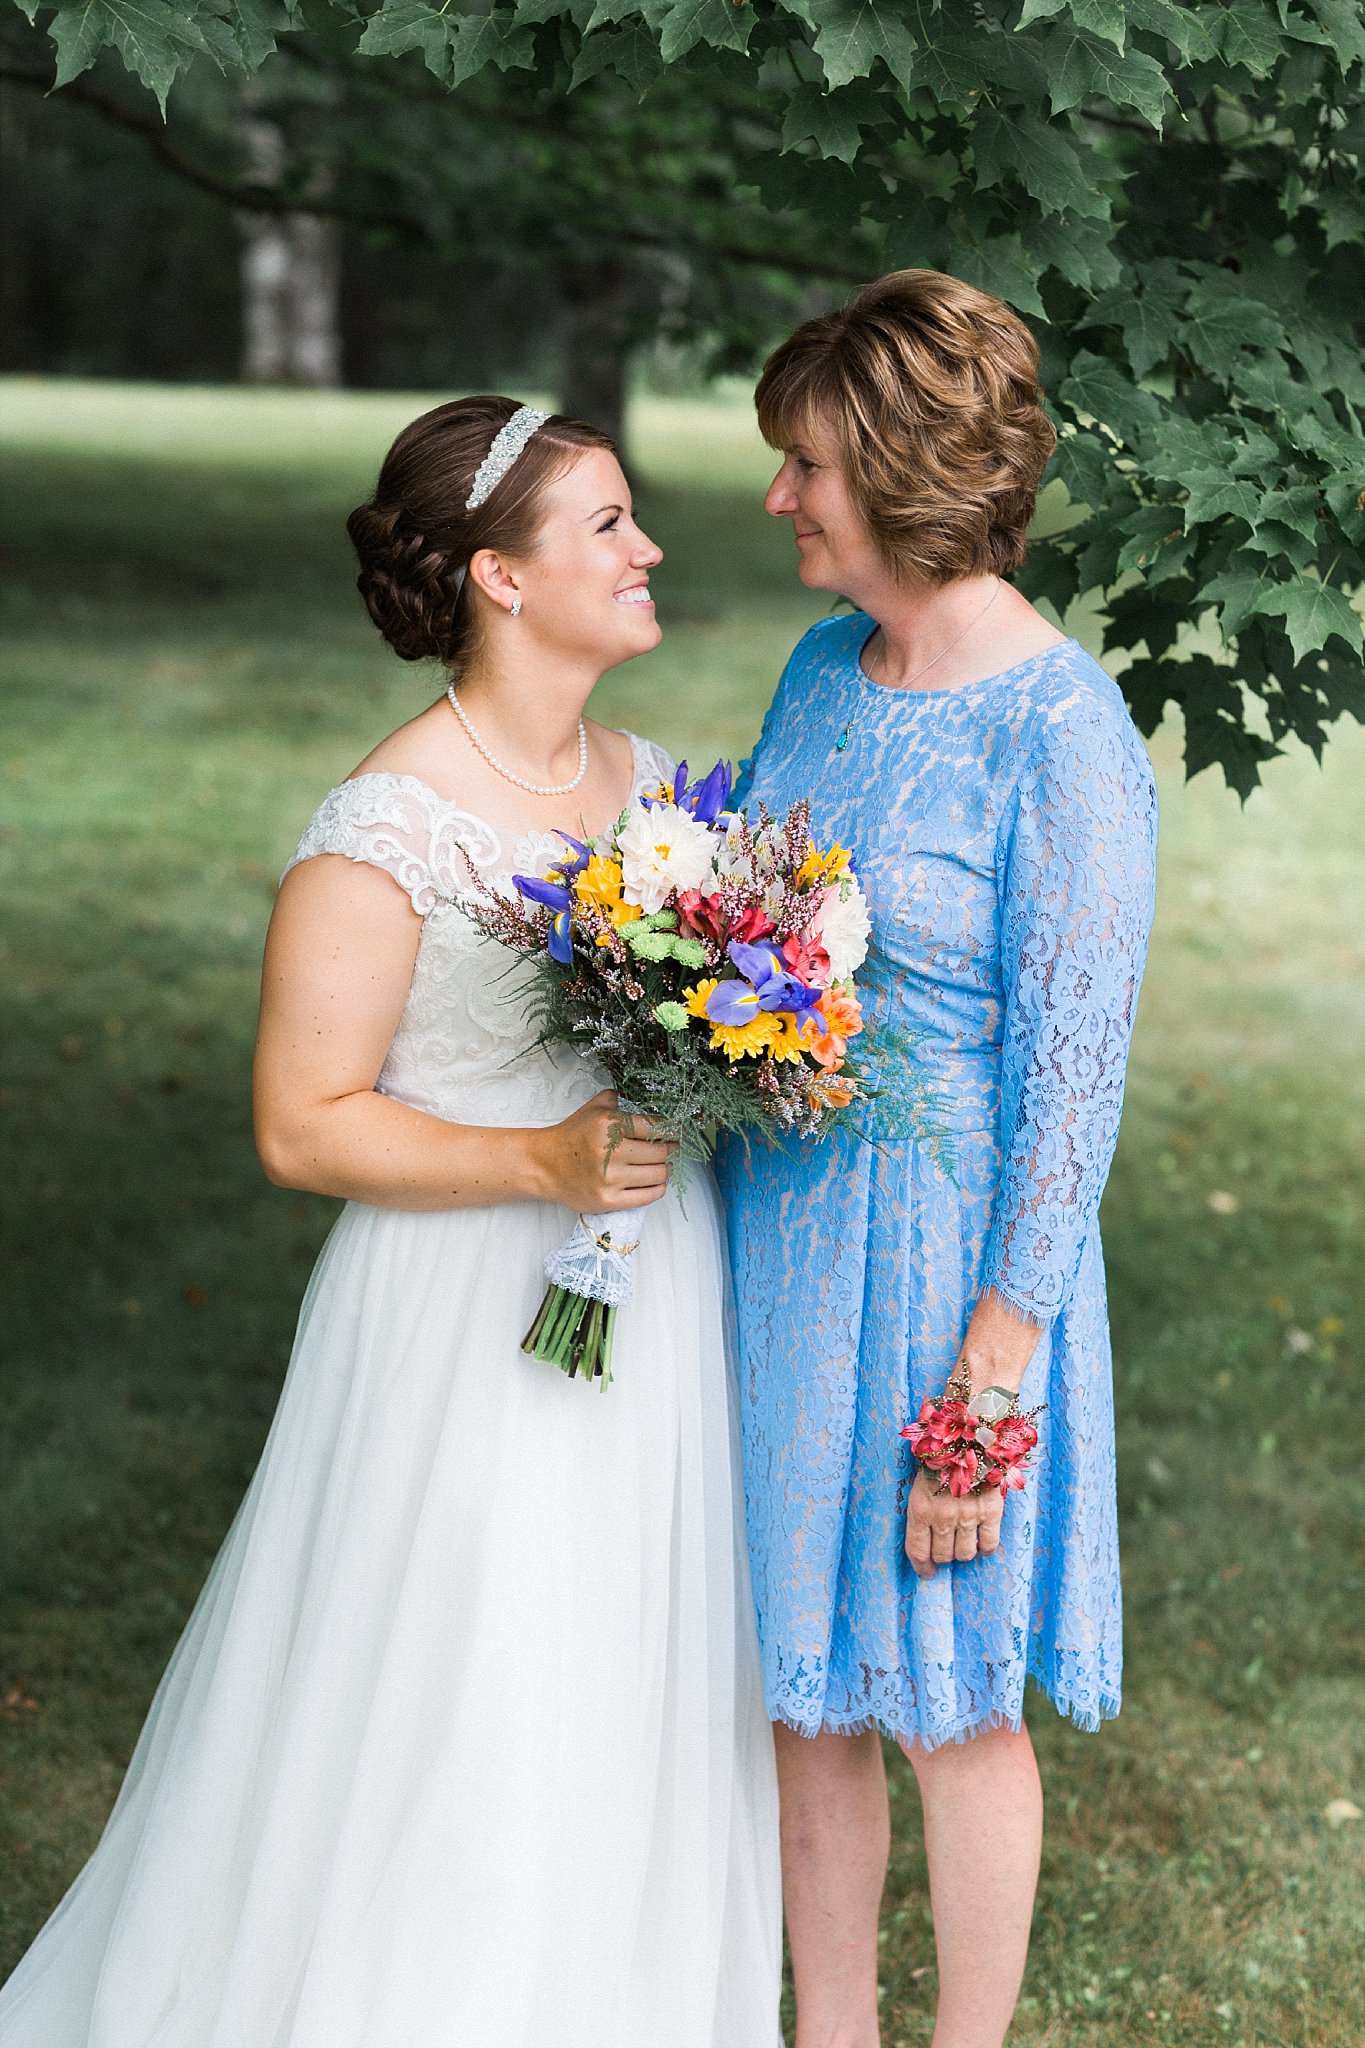 www.james-stokes.com | James Stokes Photography, LLC - Mother and bride Wisconsin wedding photographer